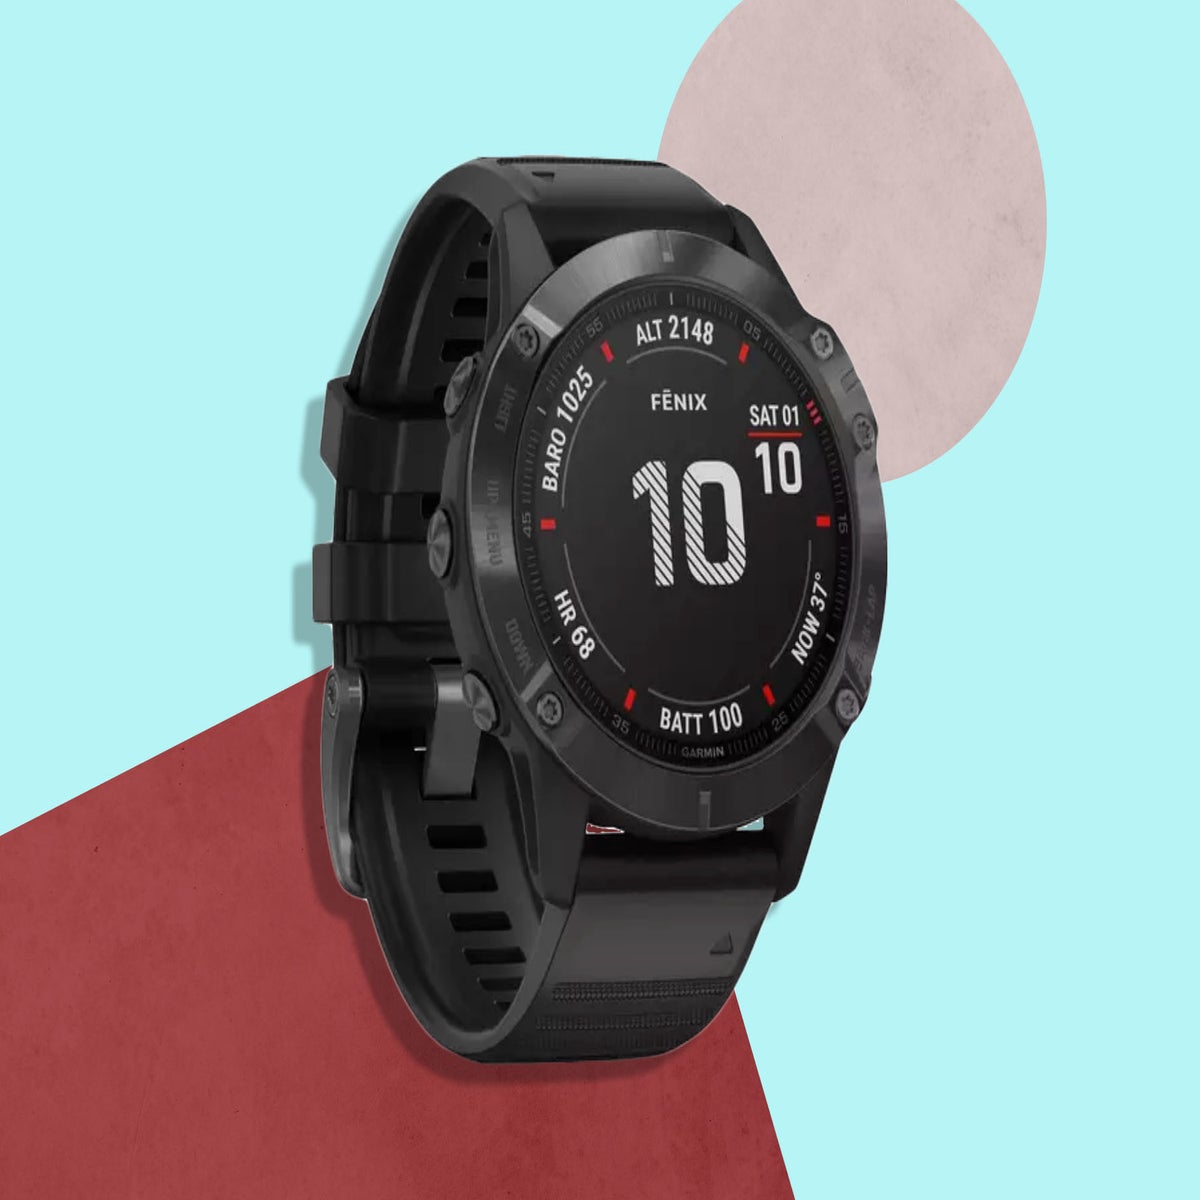 Garmin smartwatch discount: Save £150 in the Currys Black Friday sale